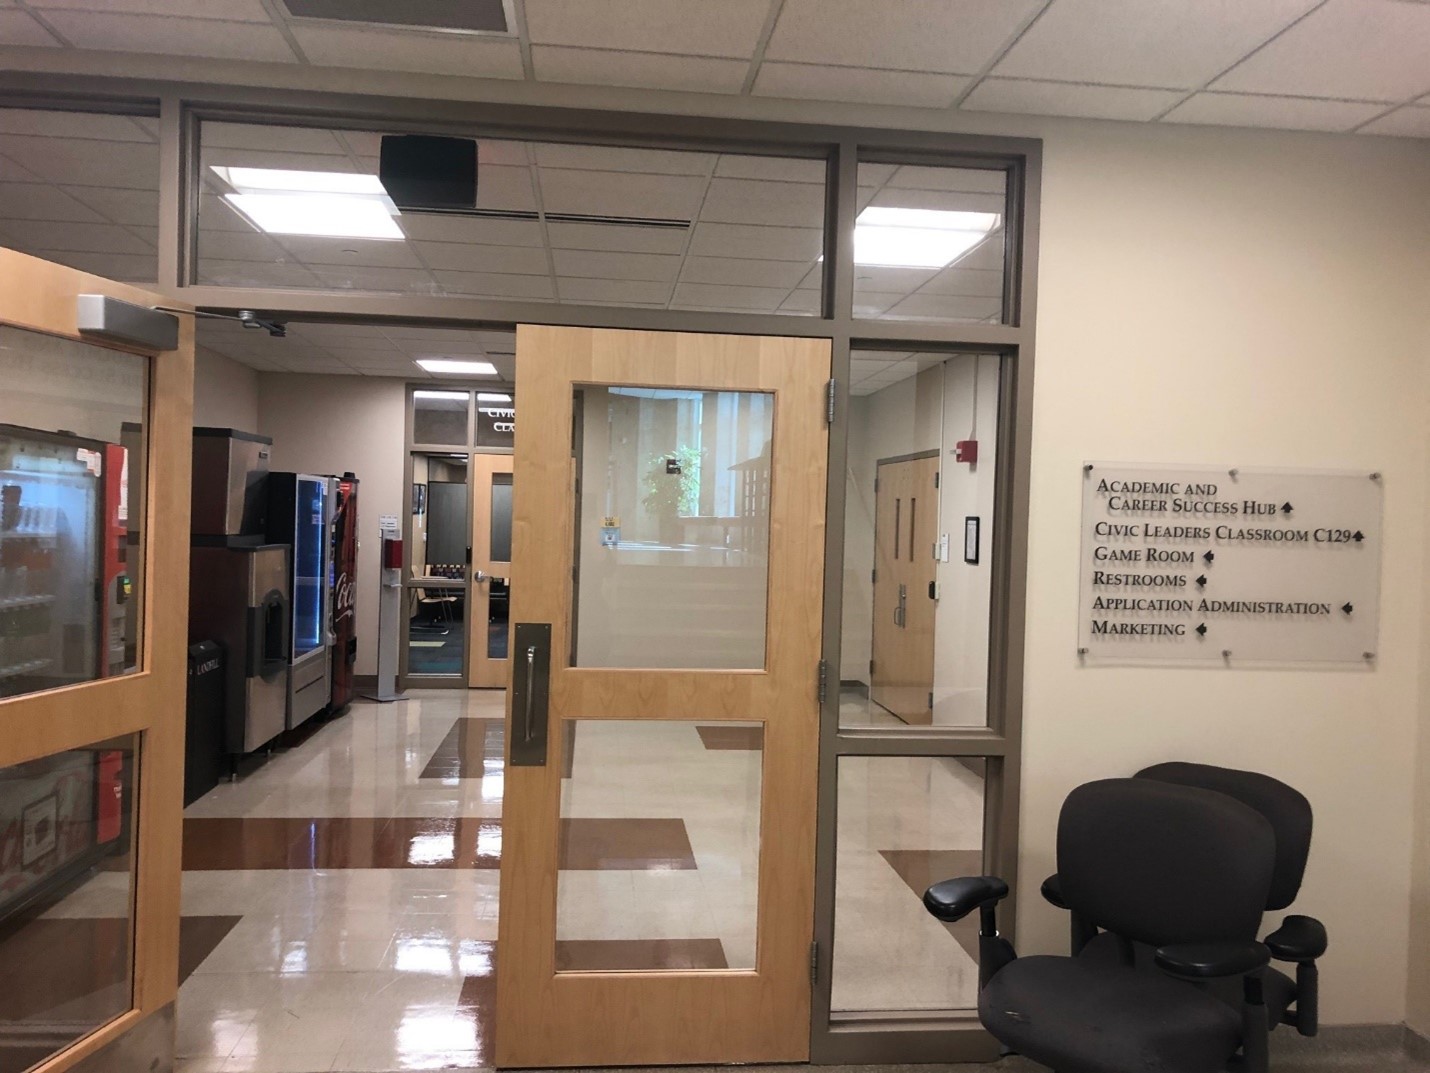 A set of clear double doors inside the Briscoe Quadrangle. There is a sign with directions on the wall next to the doors, and past the doors is a row of vending machines.